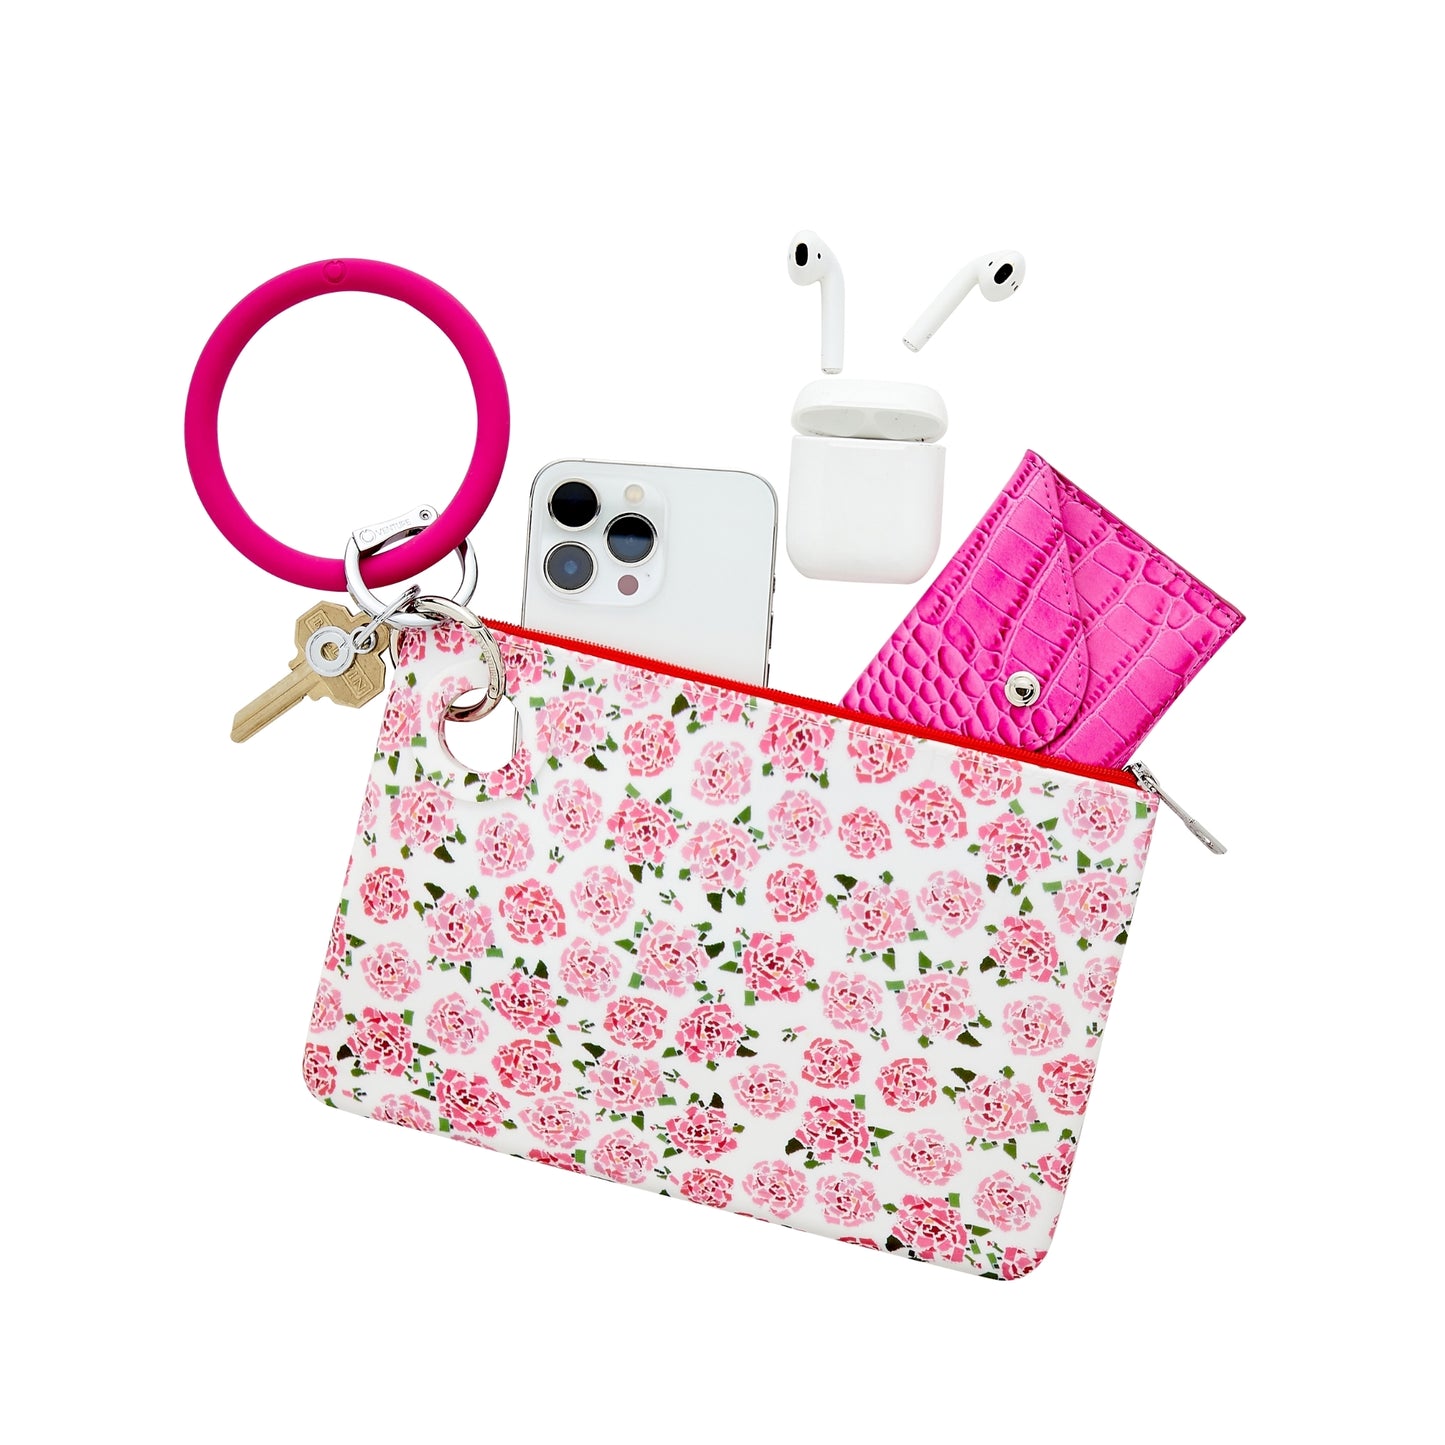 Stylish Large Pouch Wristlet with Phone Holder in pink peony print.